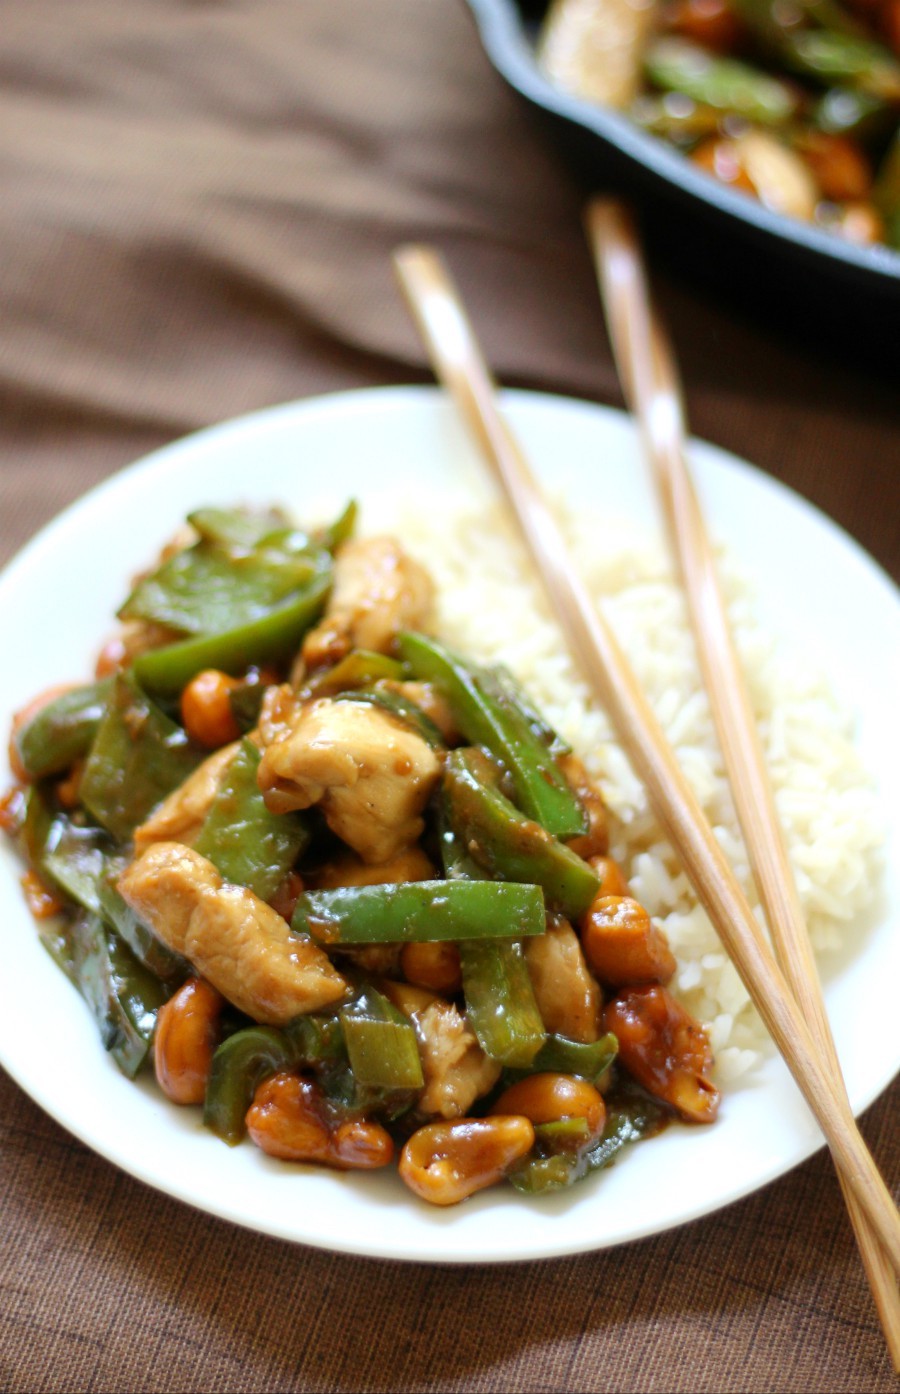 Chinese Cashew Chicken (Gluten-Free, Soy-Free) | Strength and Sunshine @RebeccaGF666 You won't need to spend money on take-out anymore! The best Chinese Cashew Chicken made right at home, gluten-free, and soy-free! A healthier recipe you can make for dinner and have the best leftovers for lunch! #cashewchicken #glutenfree #soyfree #takeout